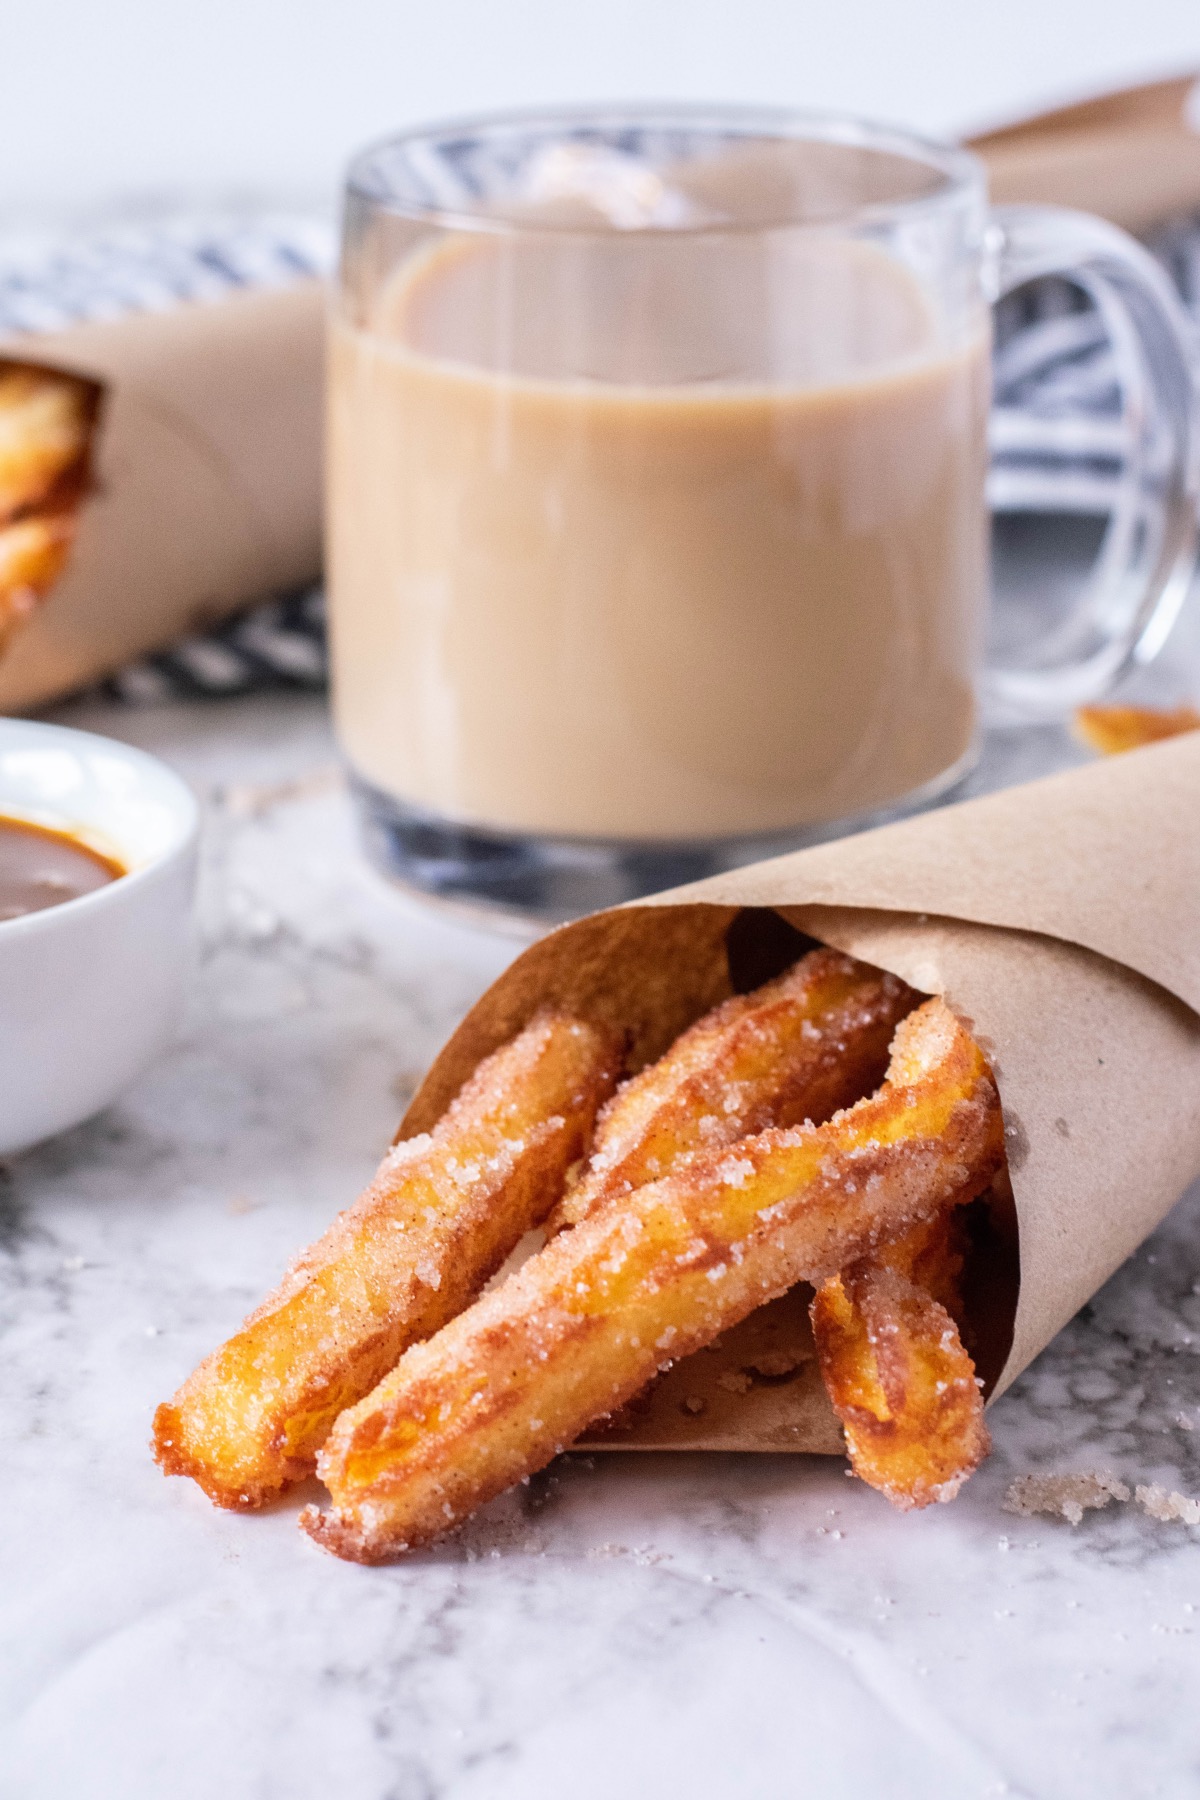 wrap the easy homemade churros in paper pop shop america